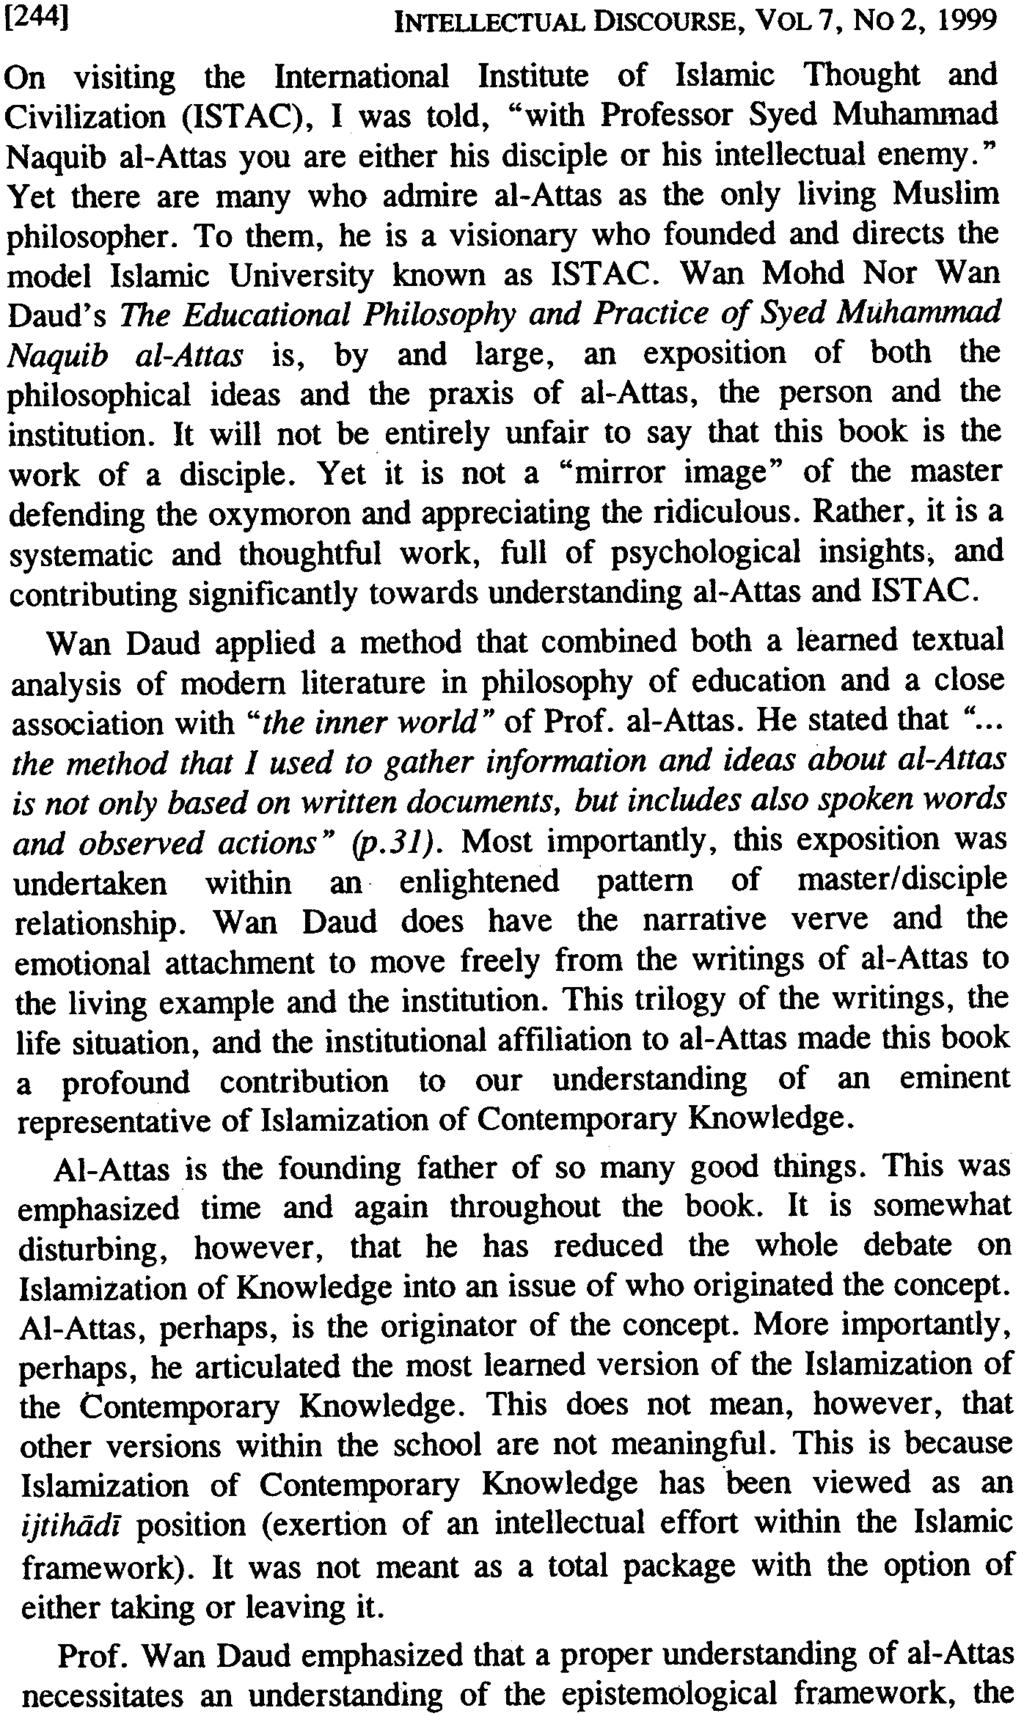 [244] INTELLECTUAL DISCOURSE, VOL 7, No 2, 1999 On visiting the International Institute of Islamic Thought and Civilization (ISTAC), I was told, "with Professor Syed Muhammad Naquib al-attas you are